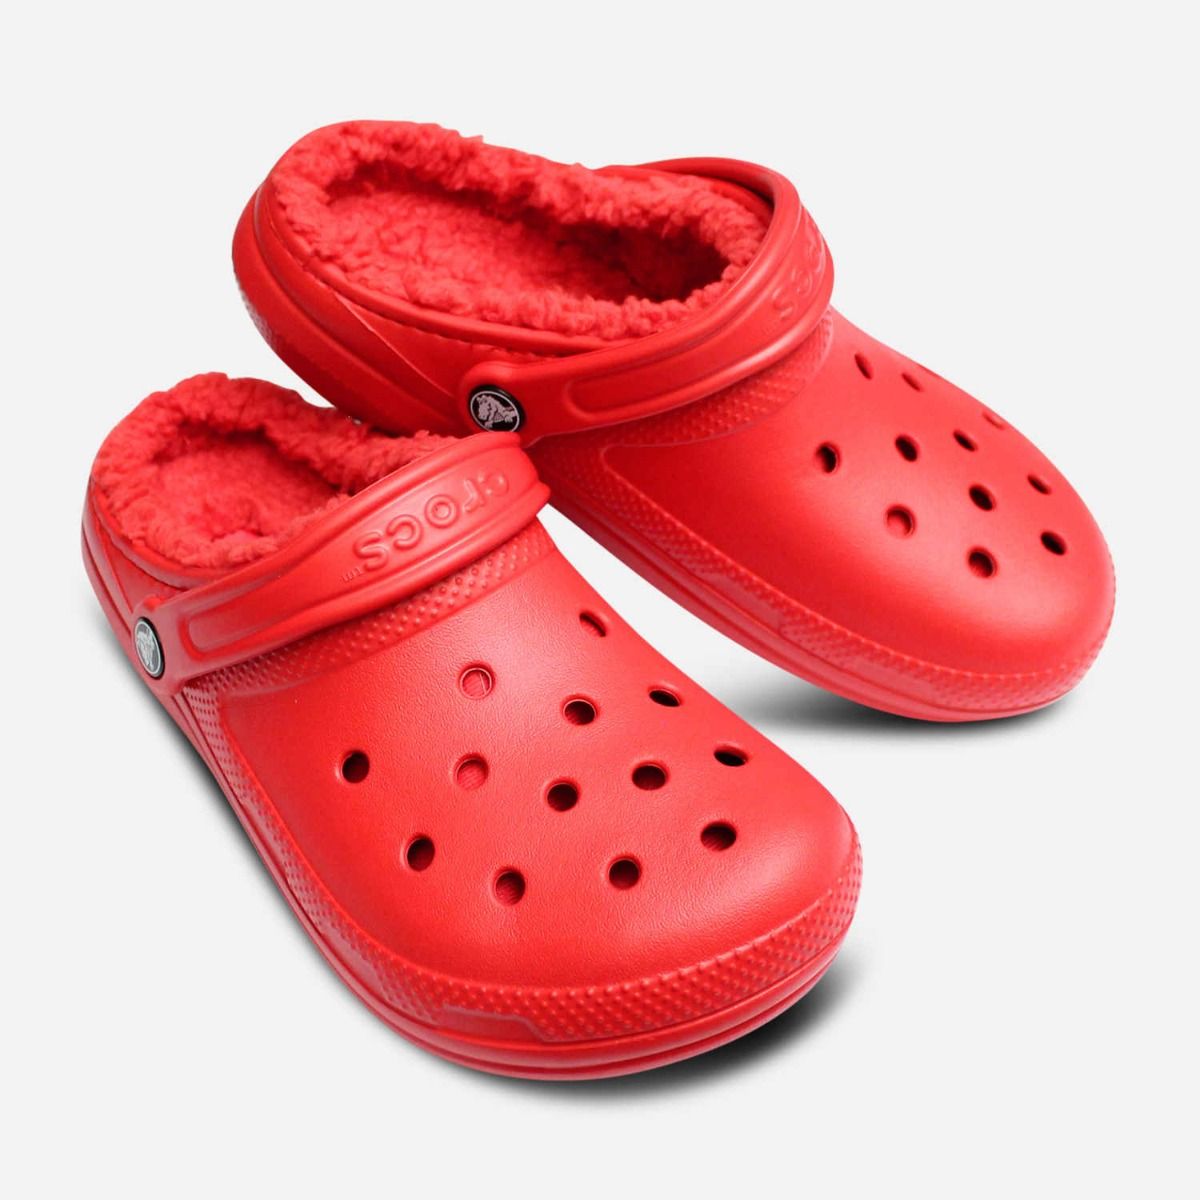 Classic Warm Lined Crocs  Clog for Women in Red